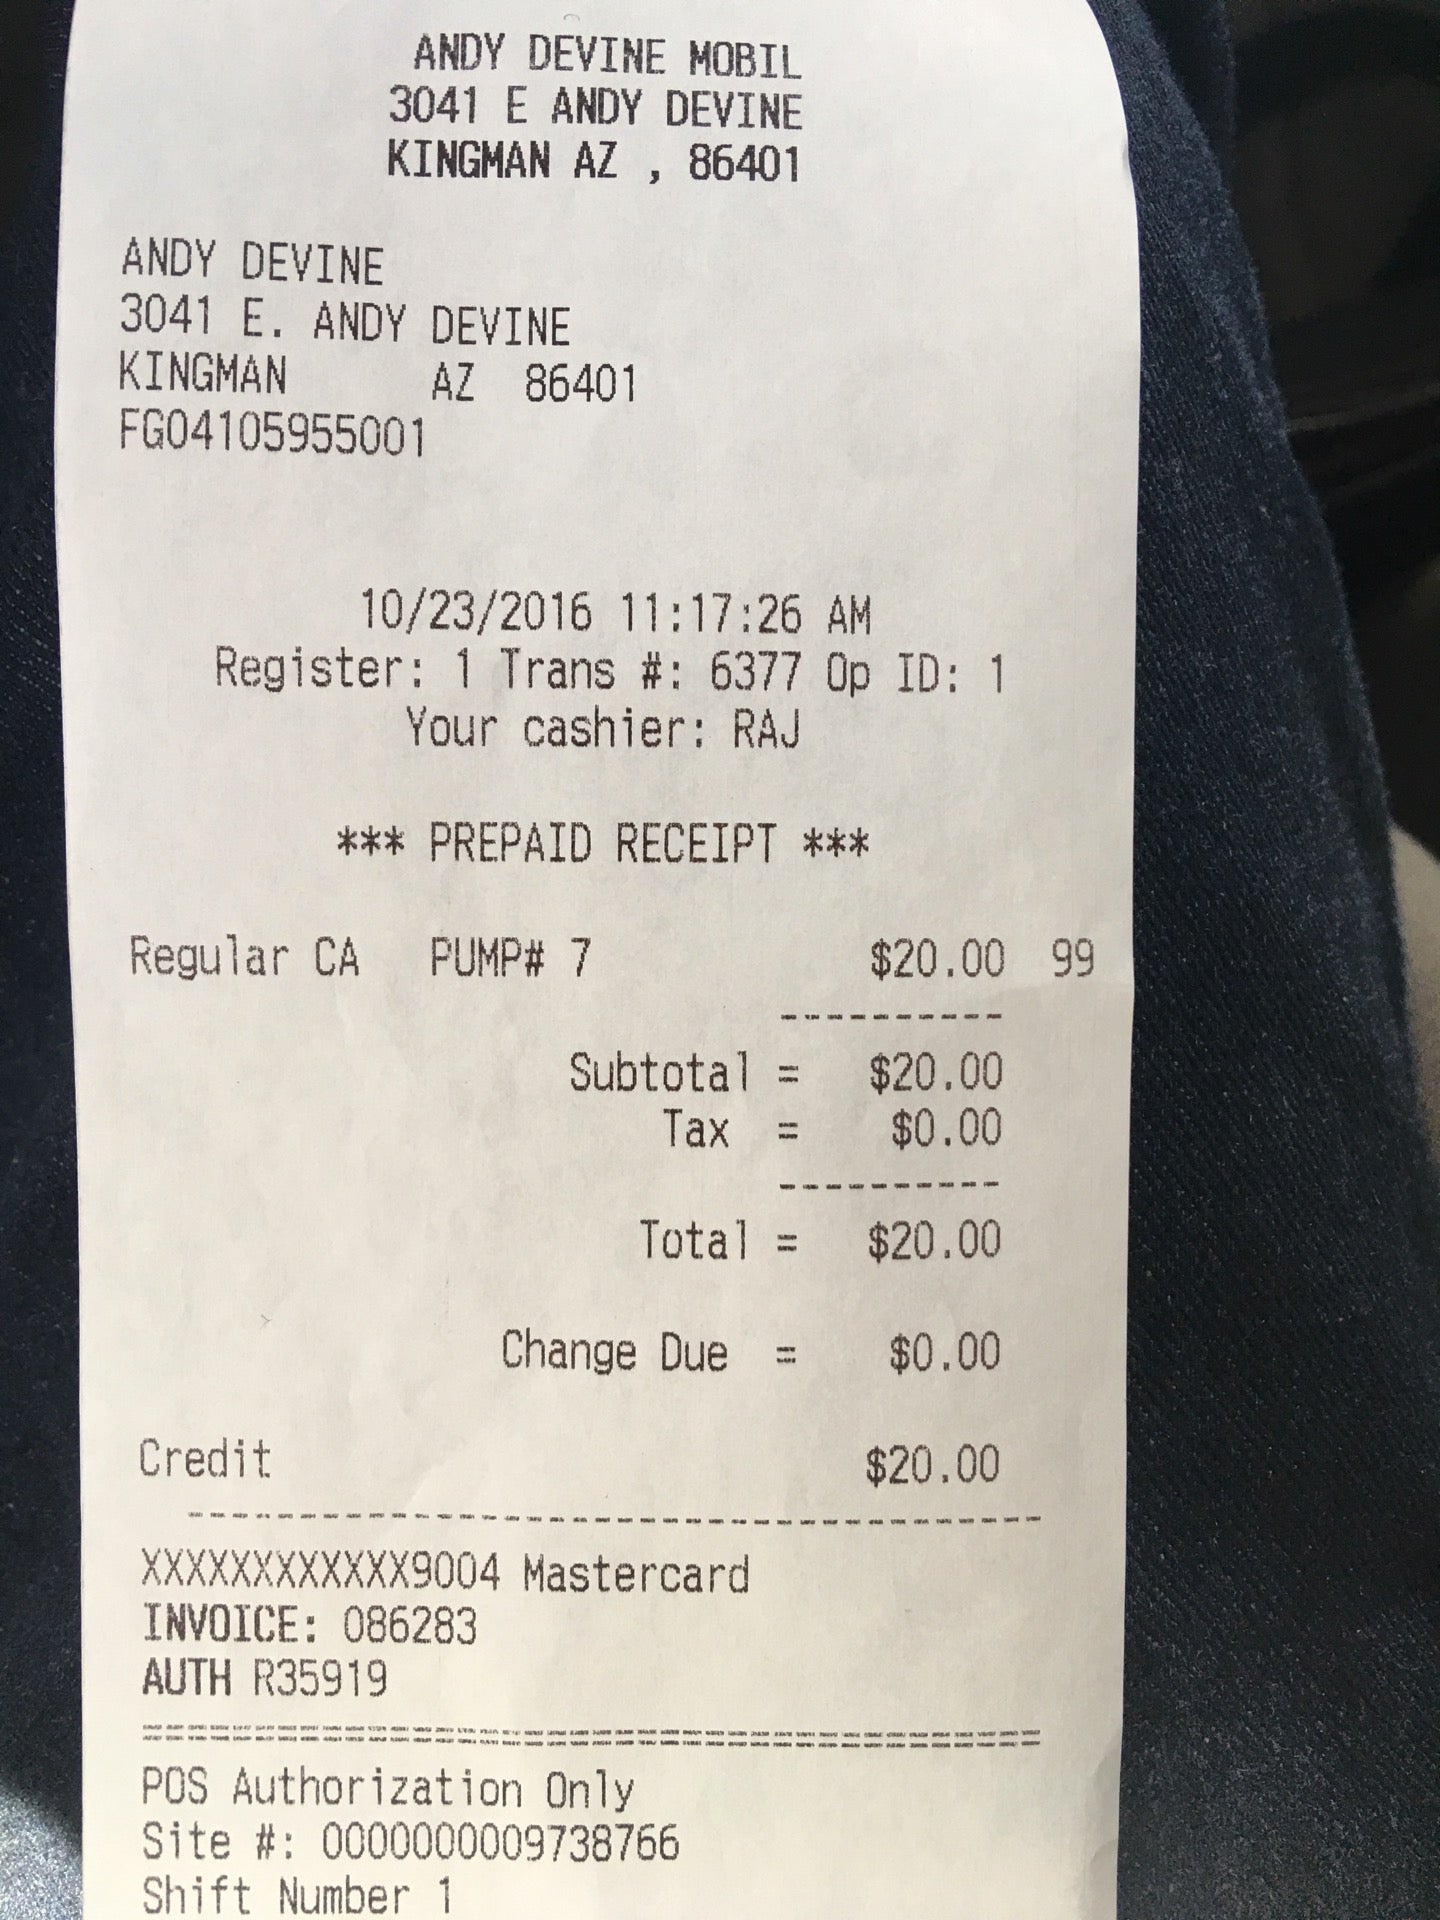 American Eagle's Receipt / Order Confirmation – 201 of 504 Receipt